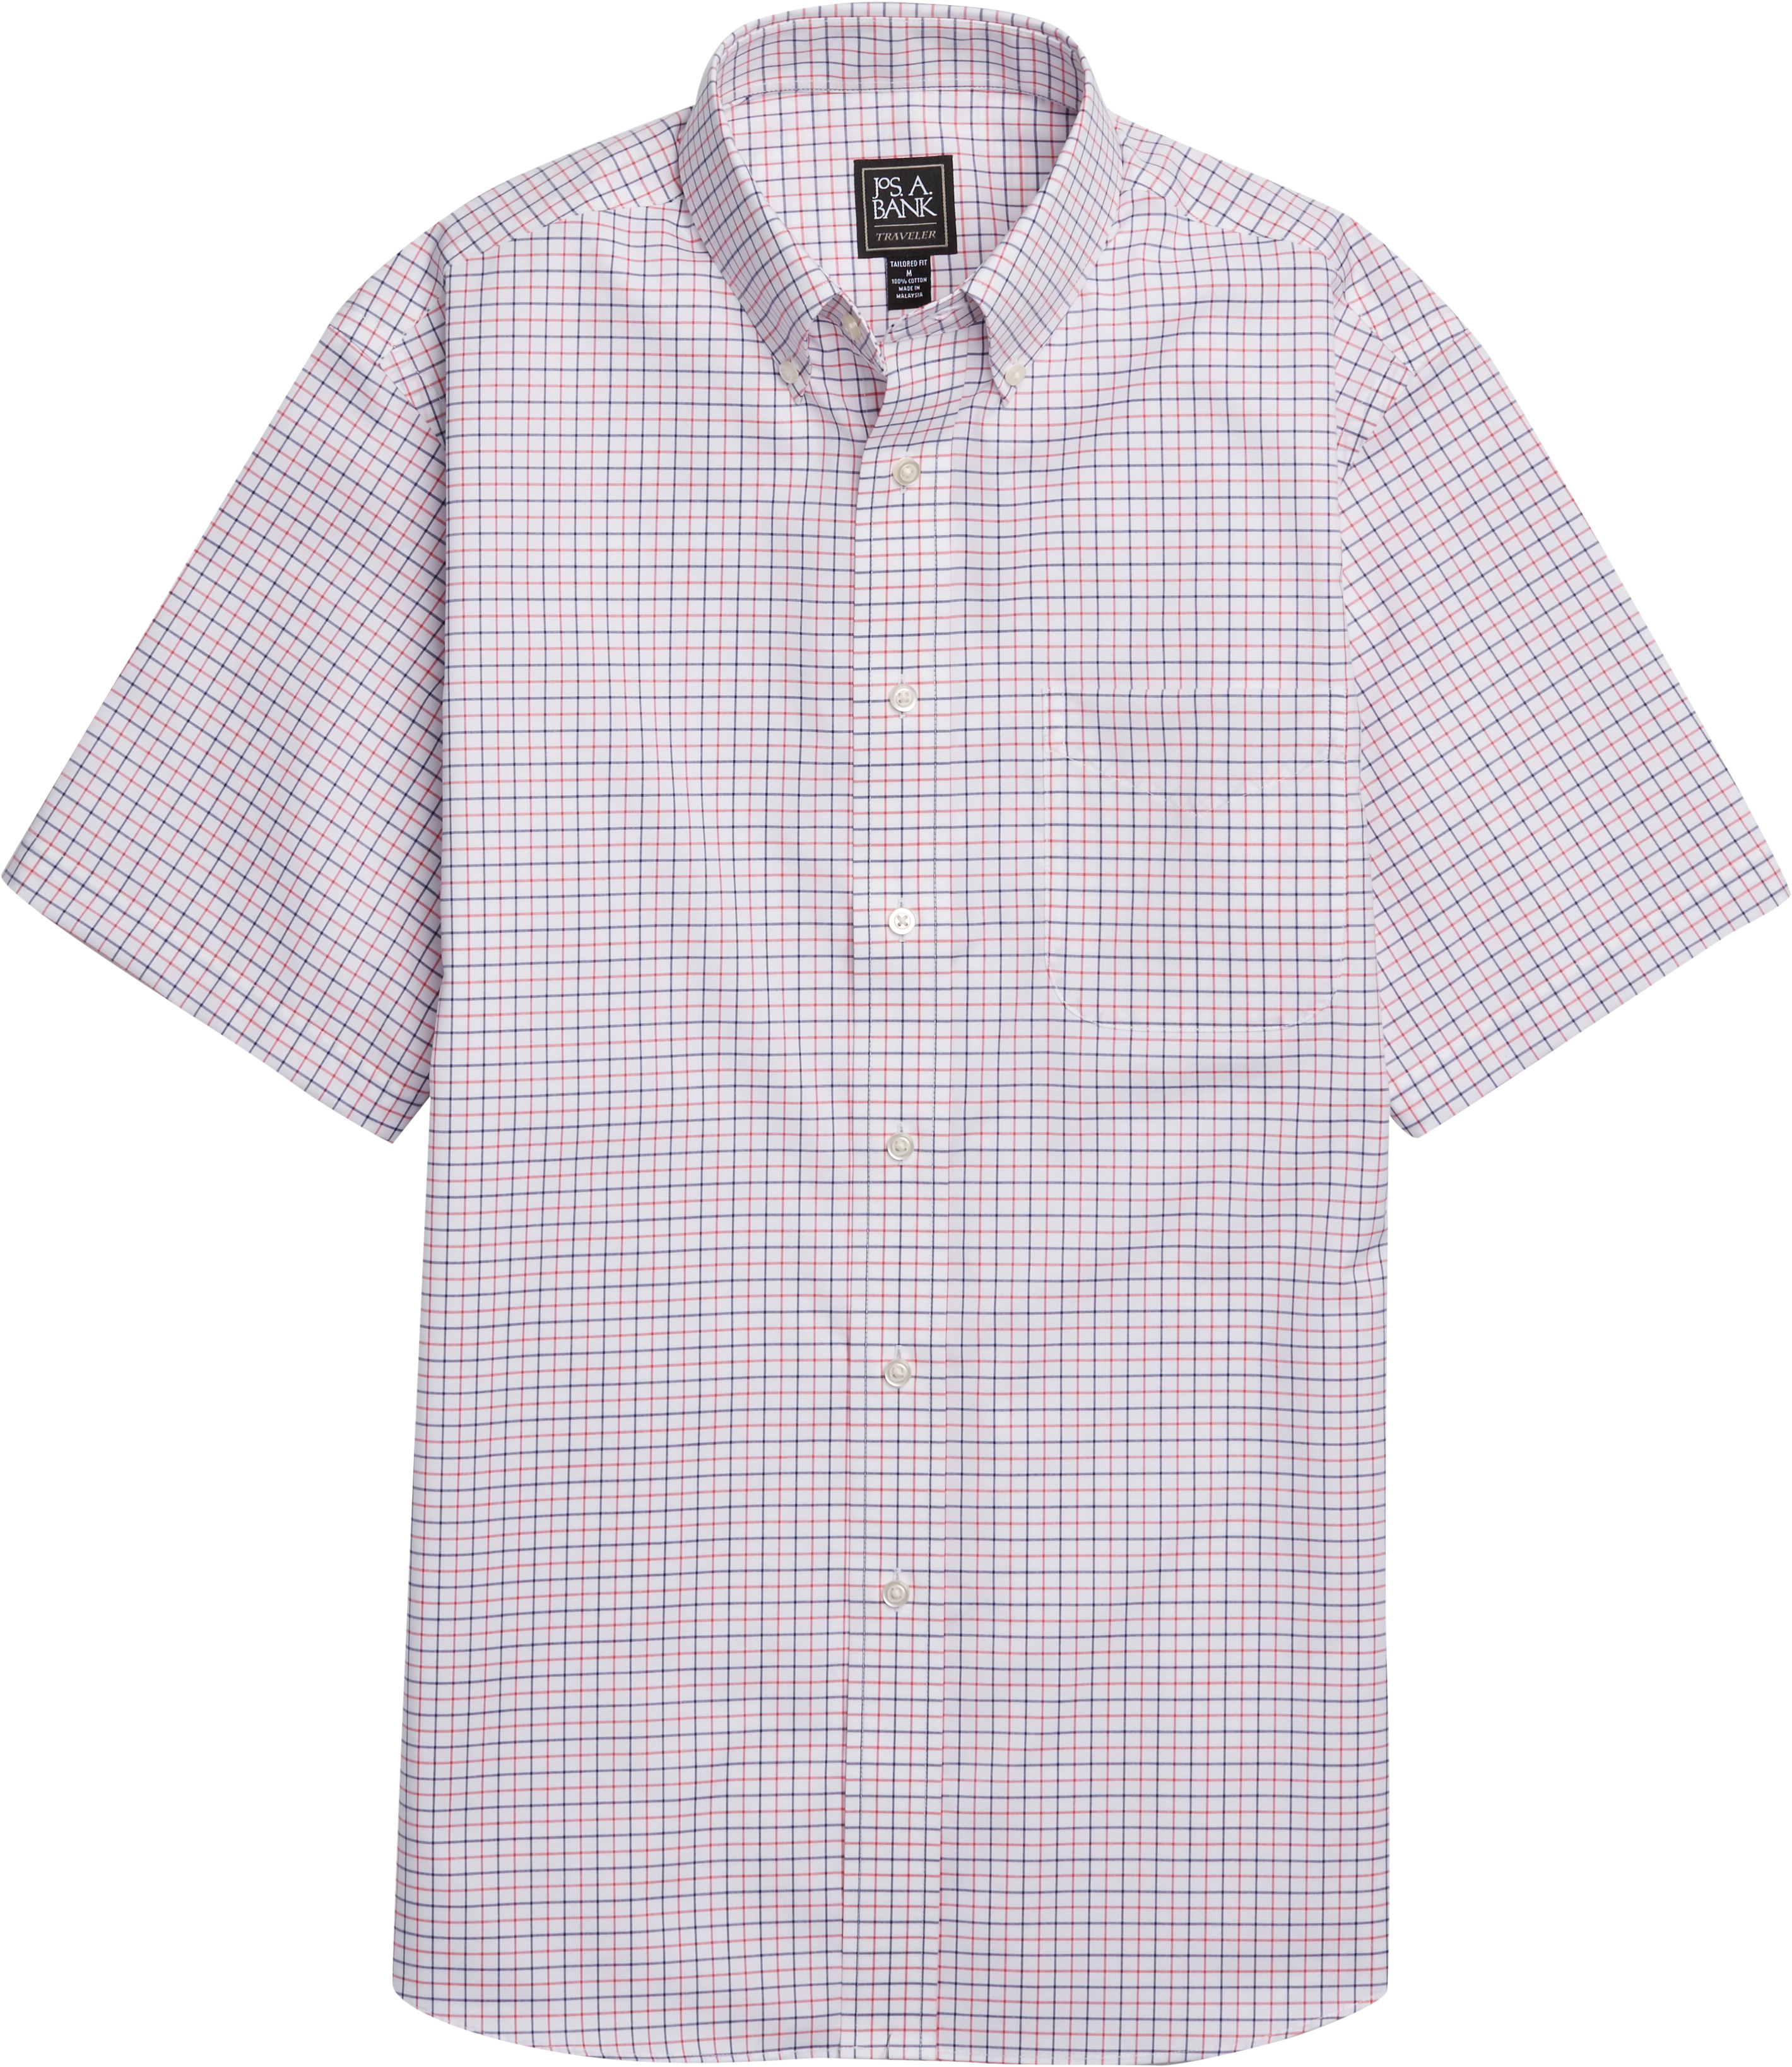 Traveler Collection Tailored Fit Button-Down Collar Short-Sleeve ...